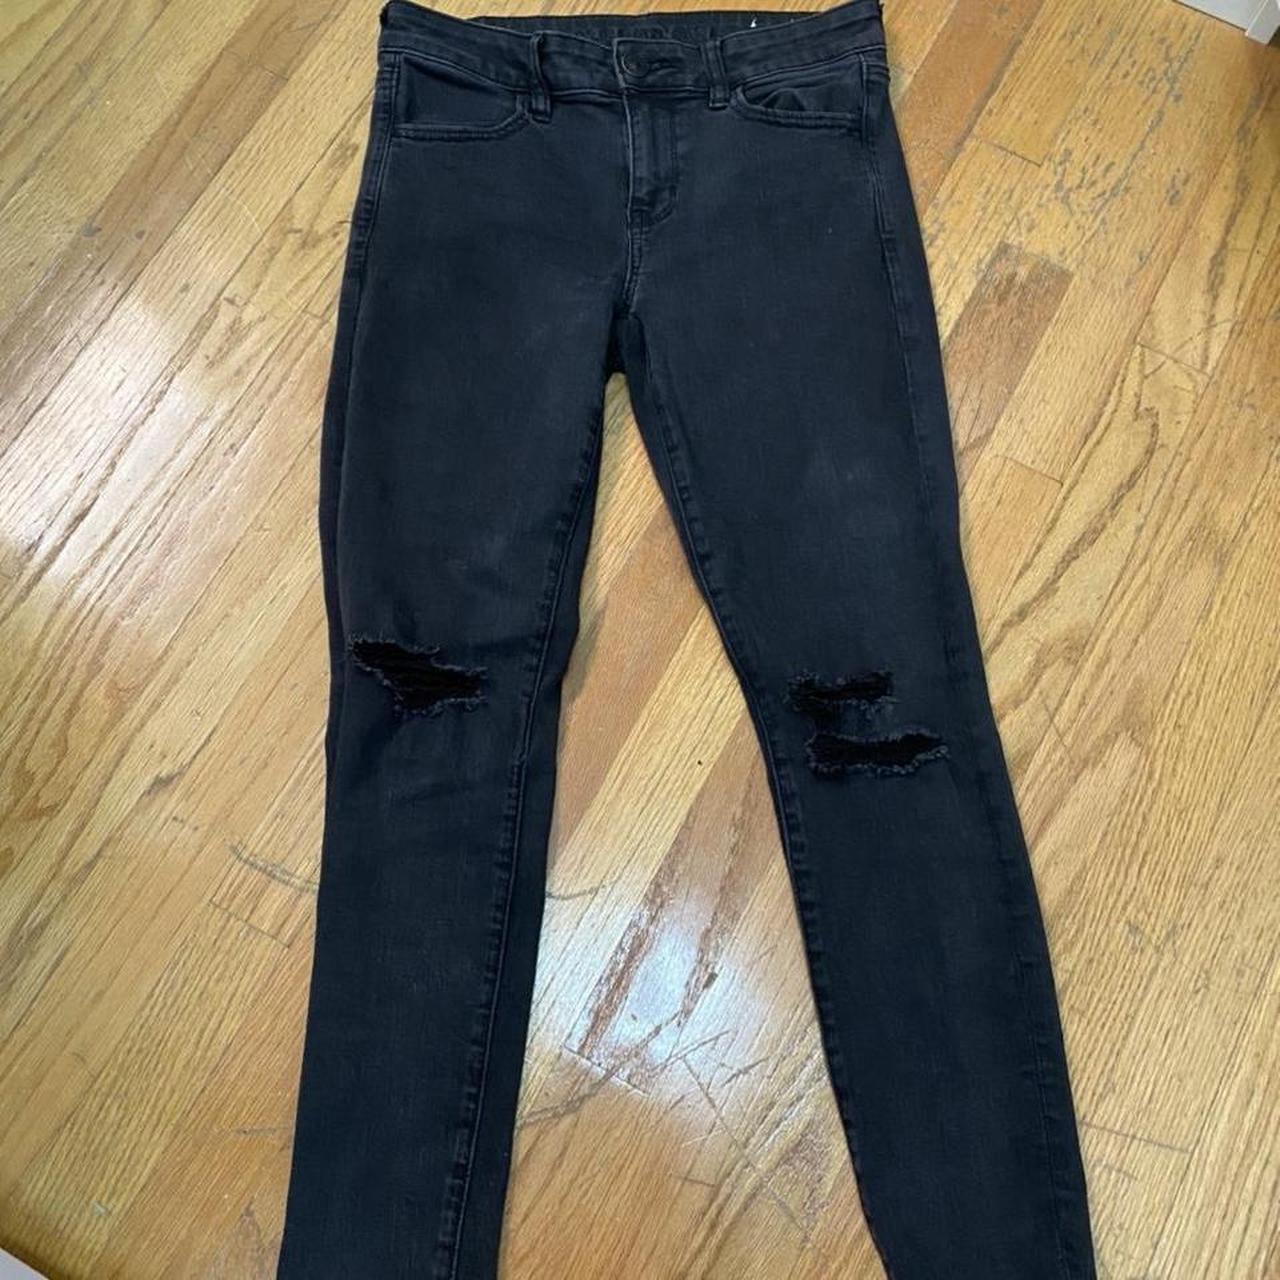 AMERICAN EAGLE SKINNY RIPPED JEANS GREAT CONDITION - Depop